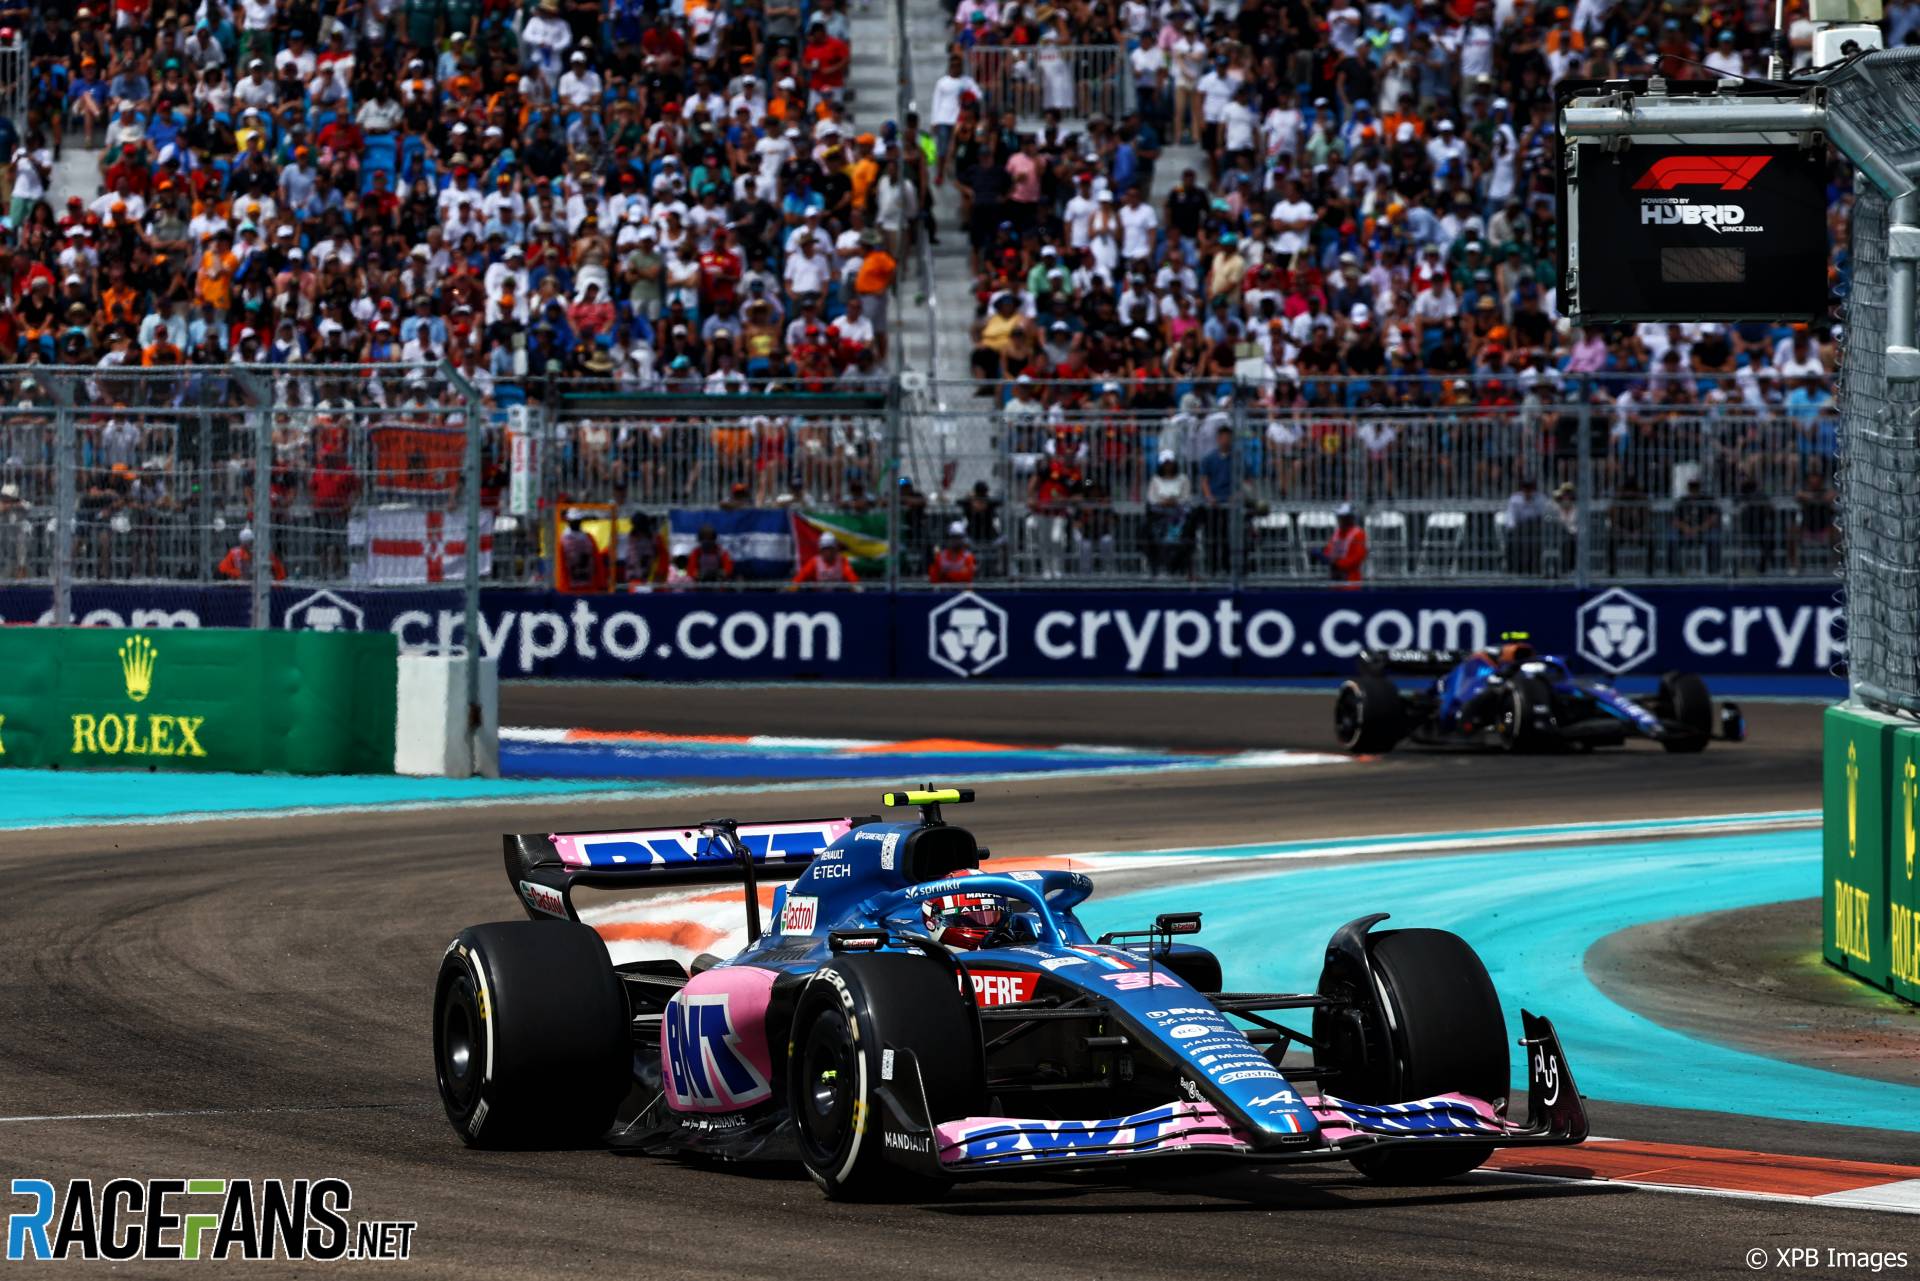 Ocon felt at “50% physically” in race after 51G practice crash | RaceFans Round-up